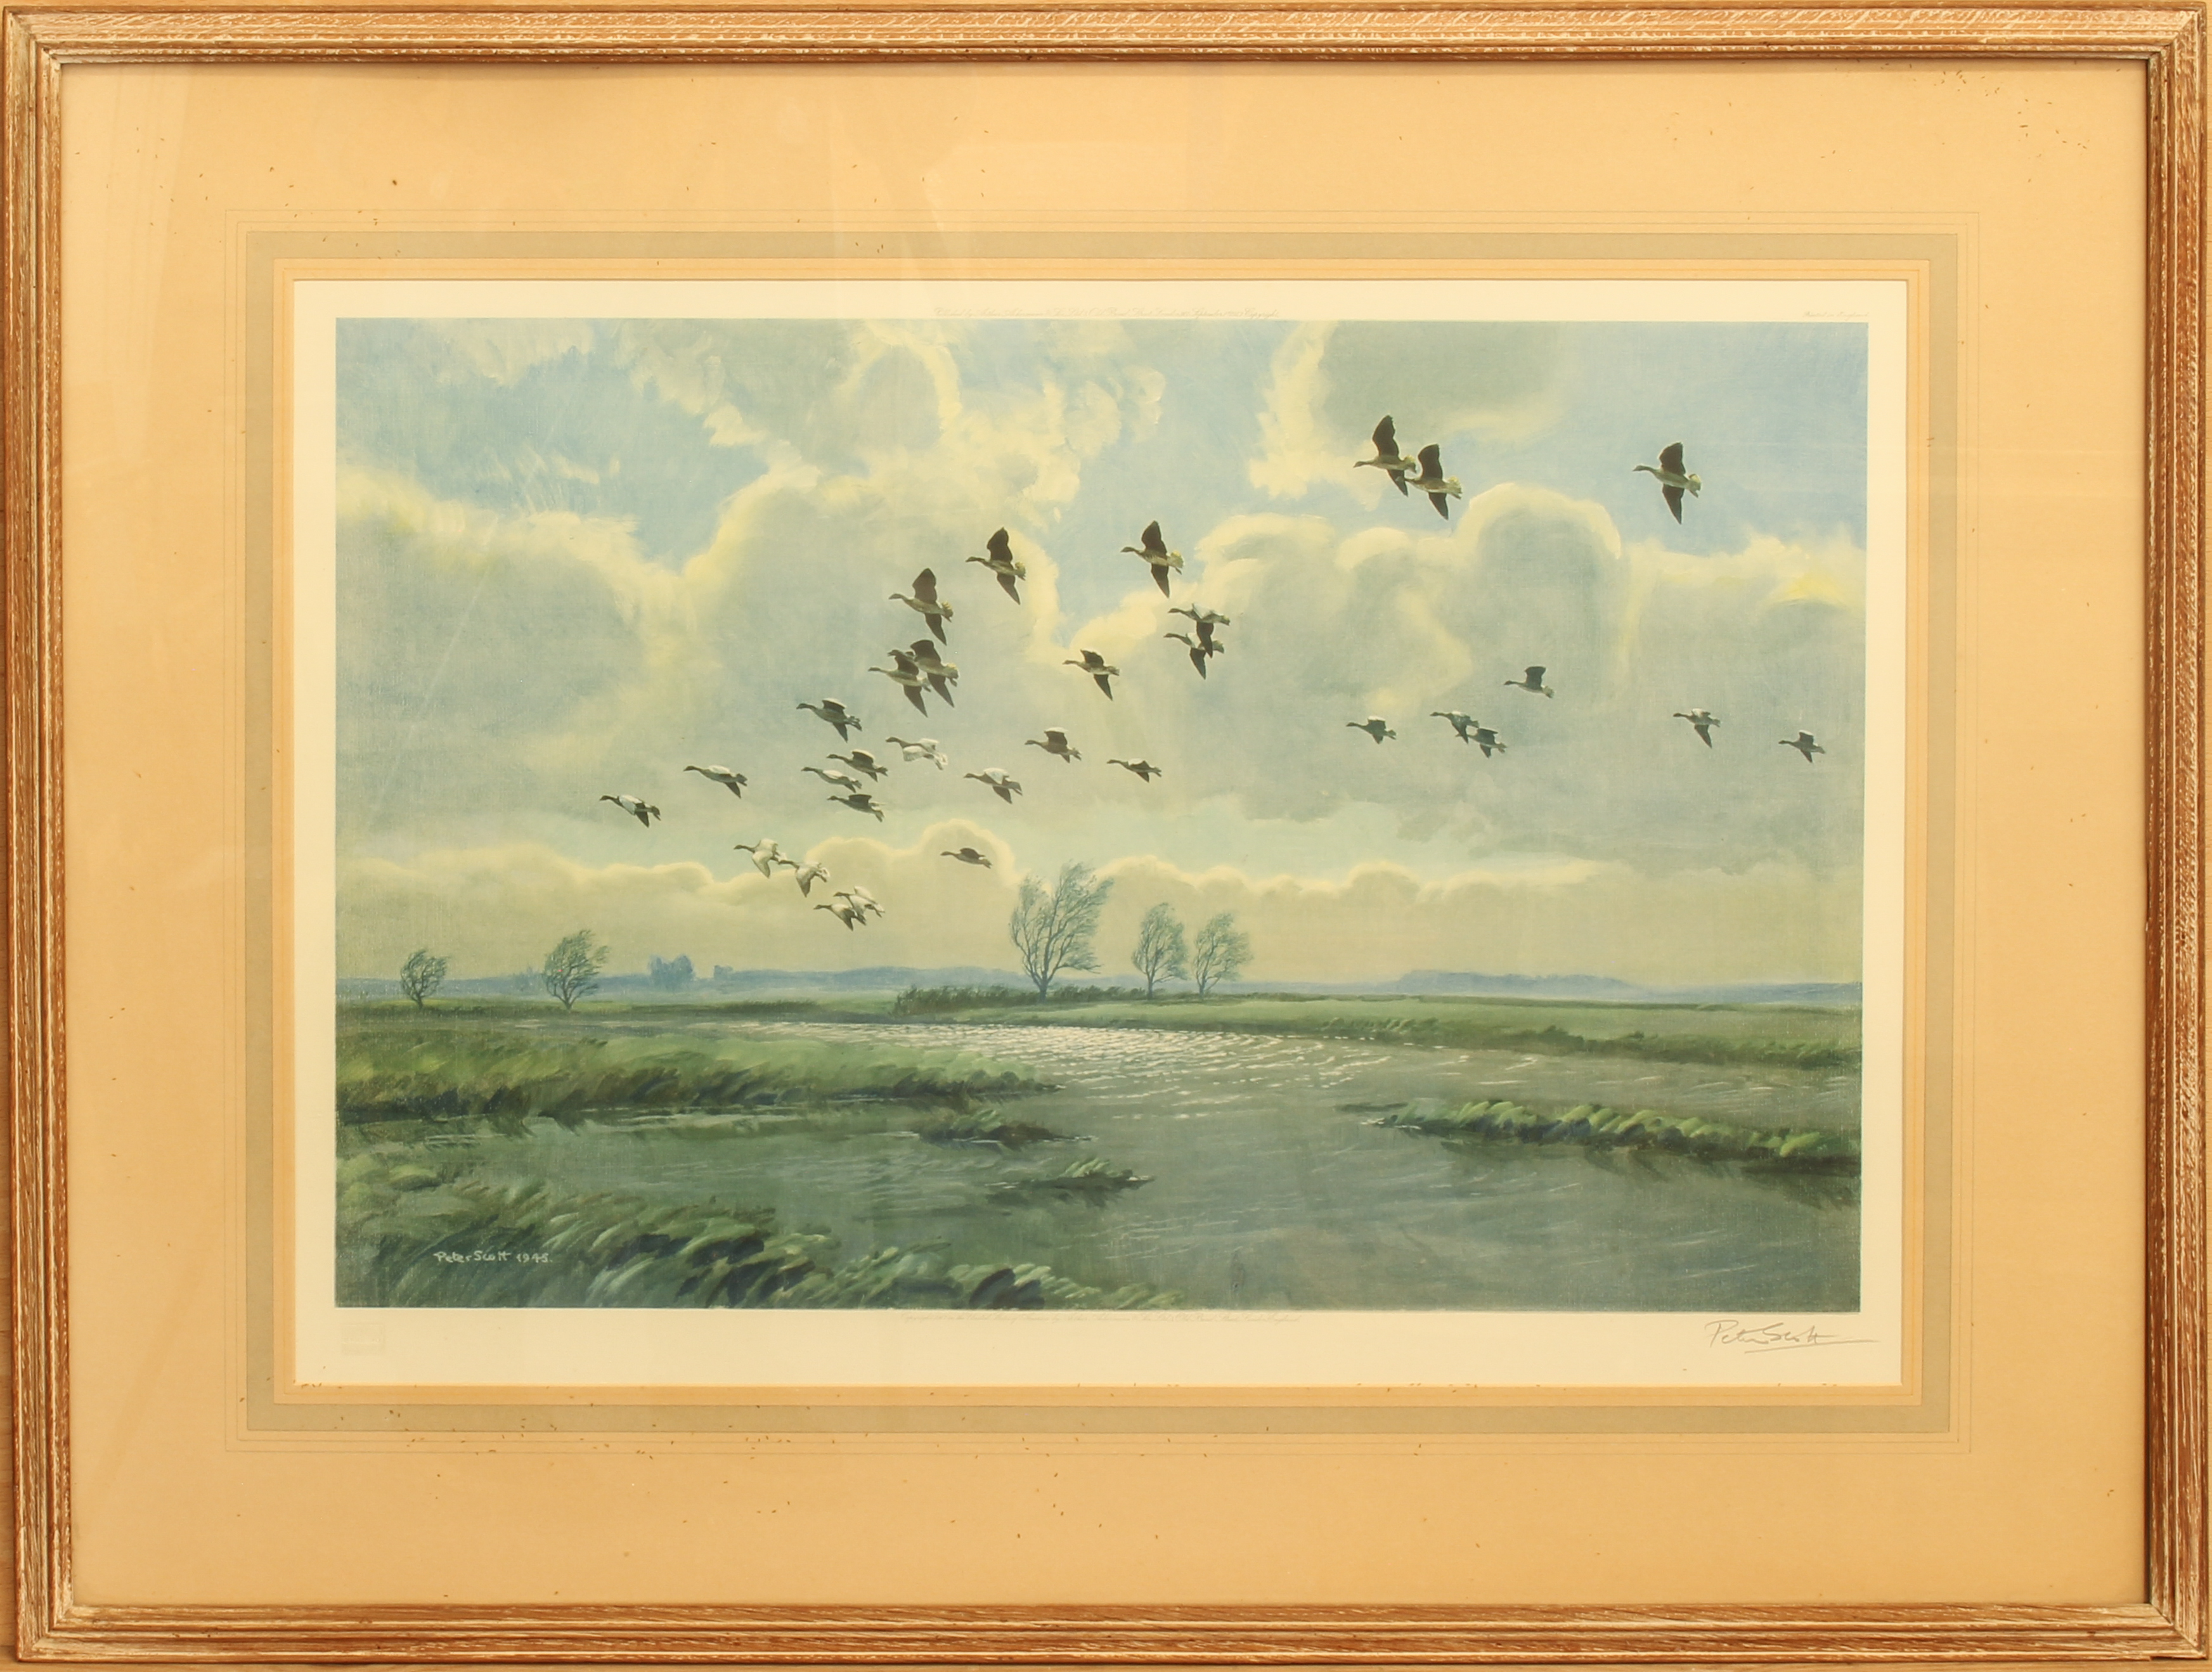 Peter Scott (British, 1909-1989) Geese in flight over salt marshes limited edition colour